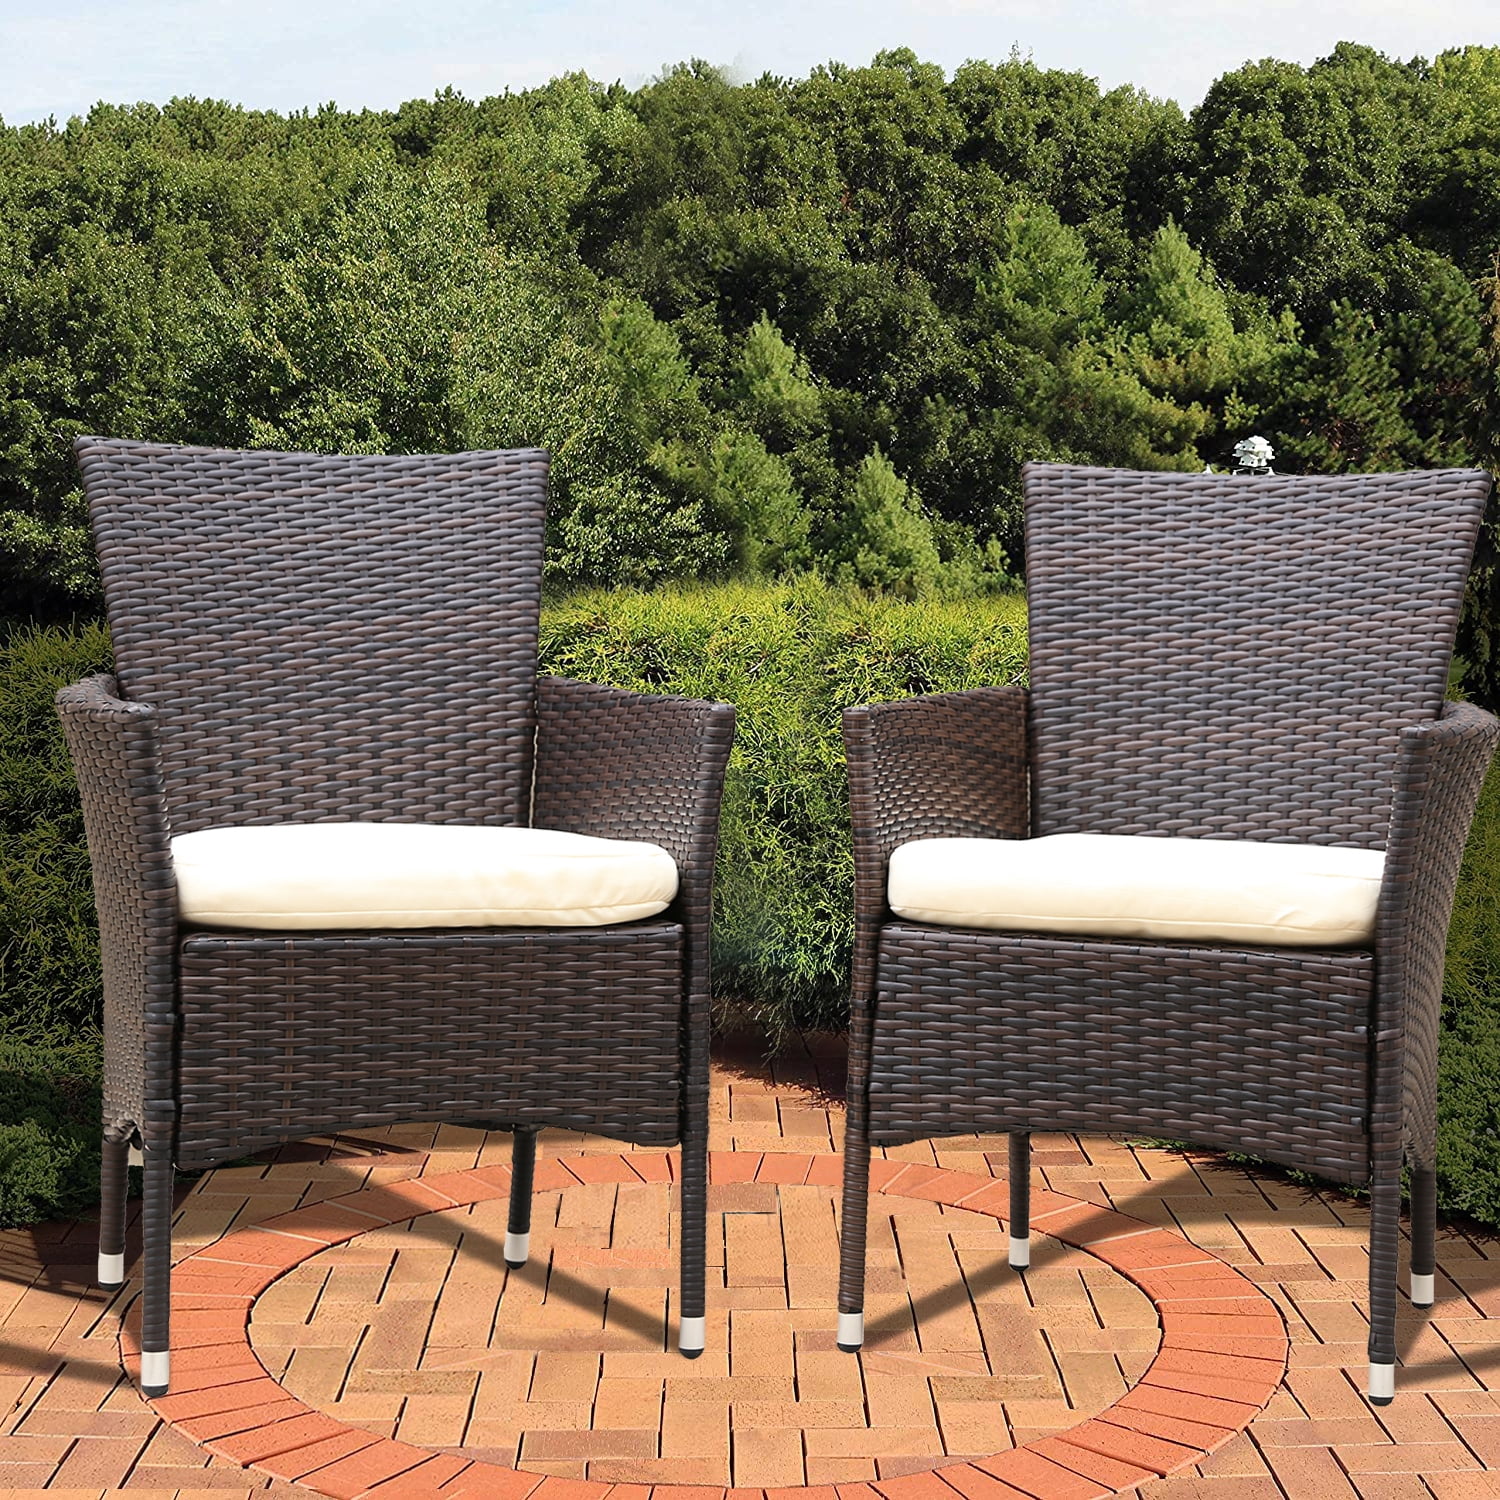 Outdoor Brown Wicker Dining Chair with Beige Cushion Set of 2 